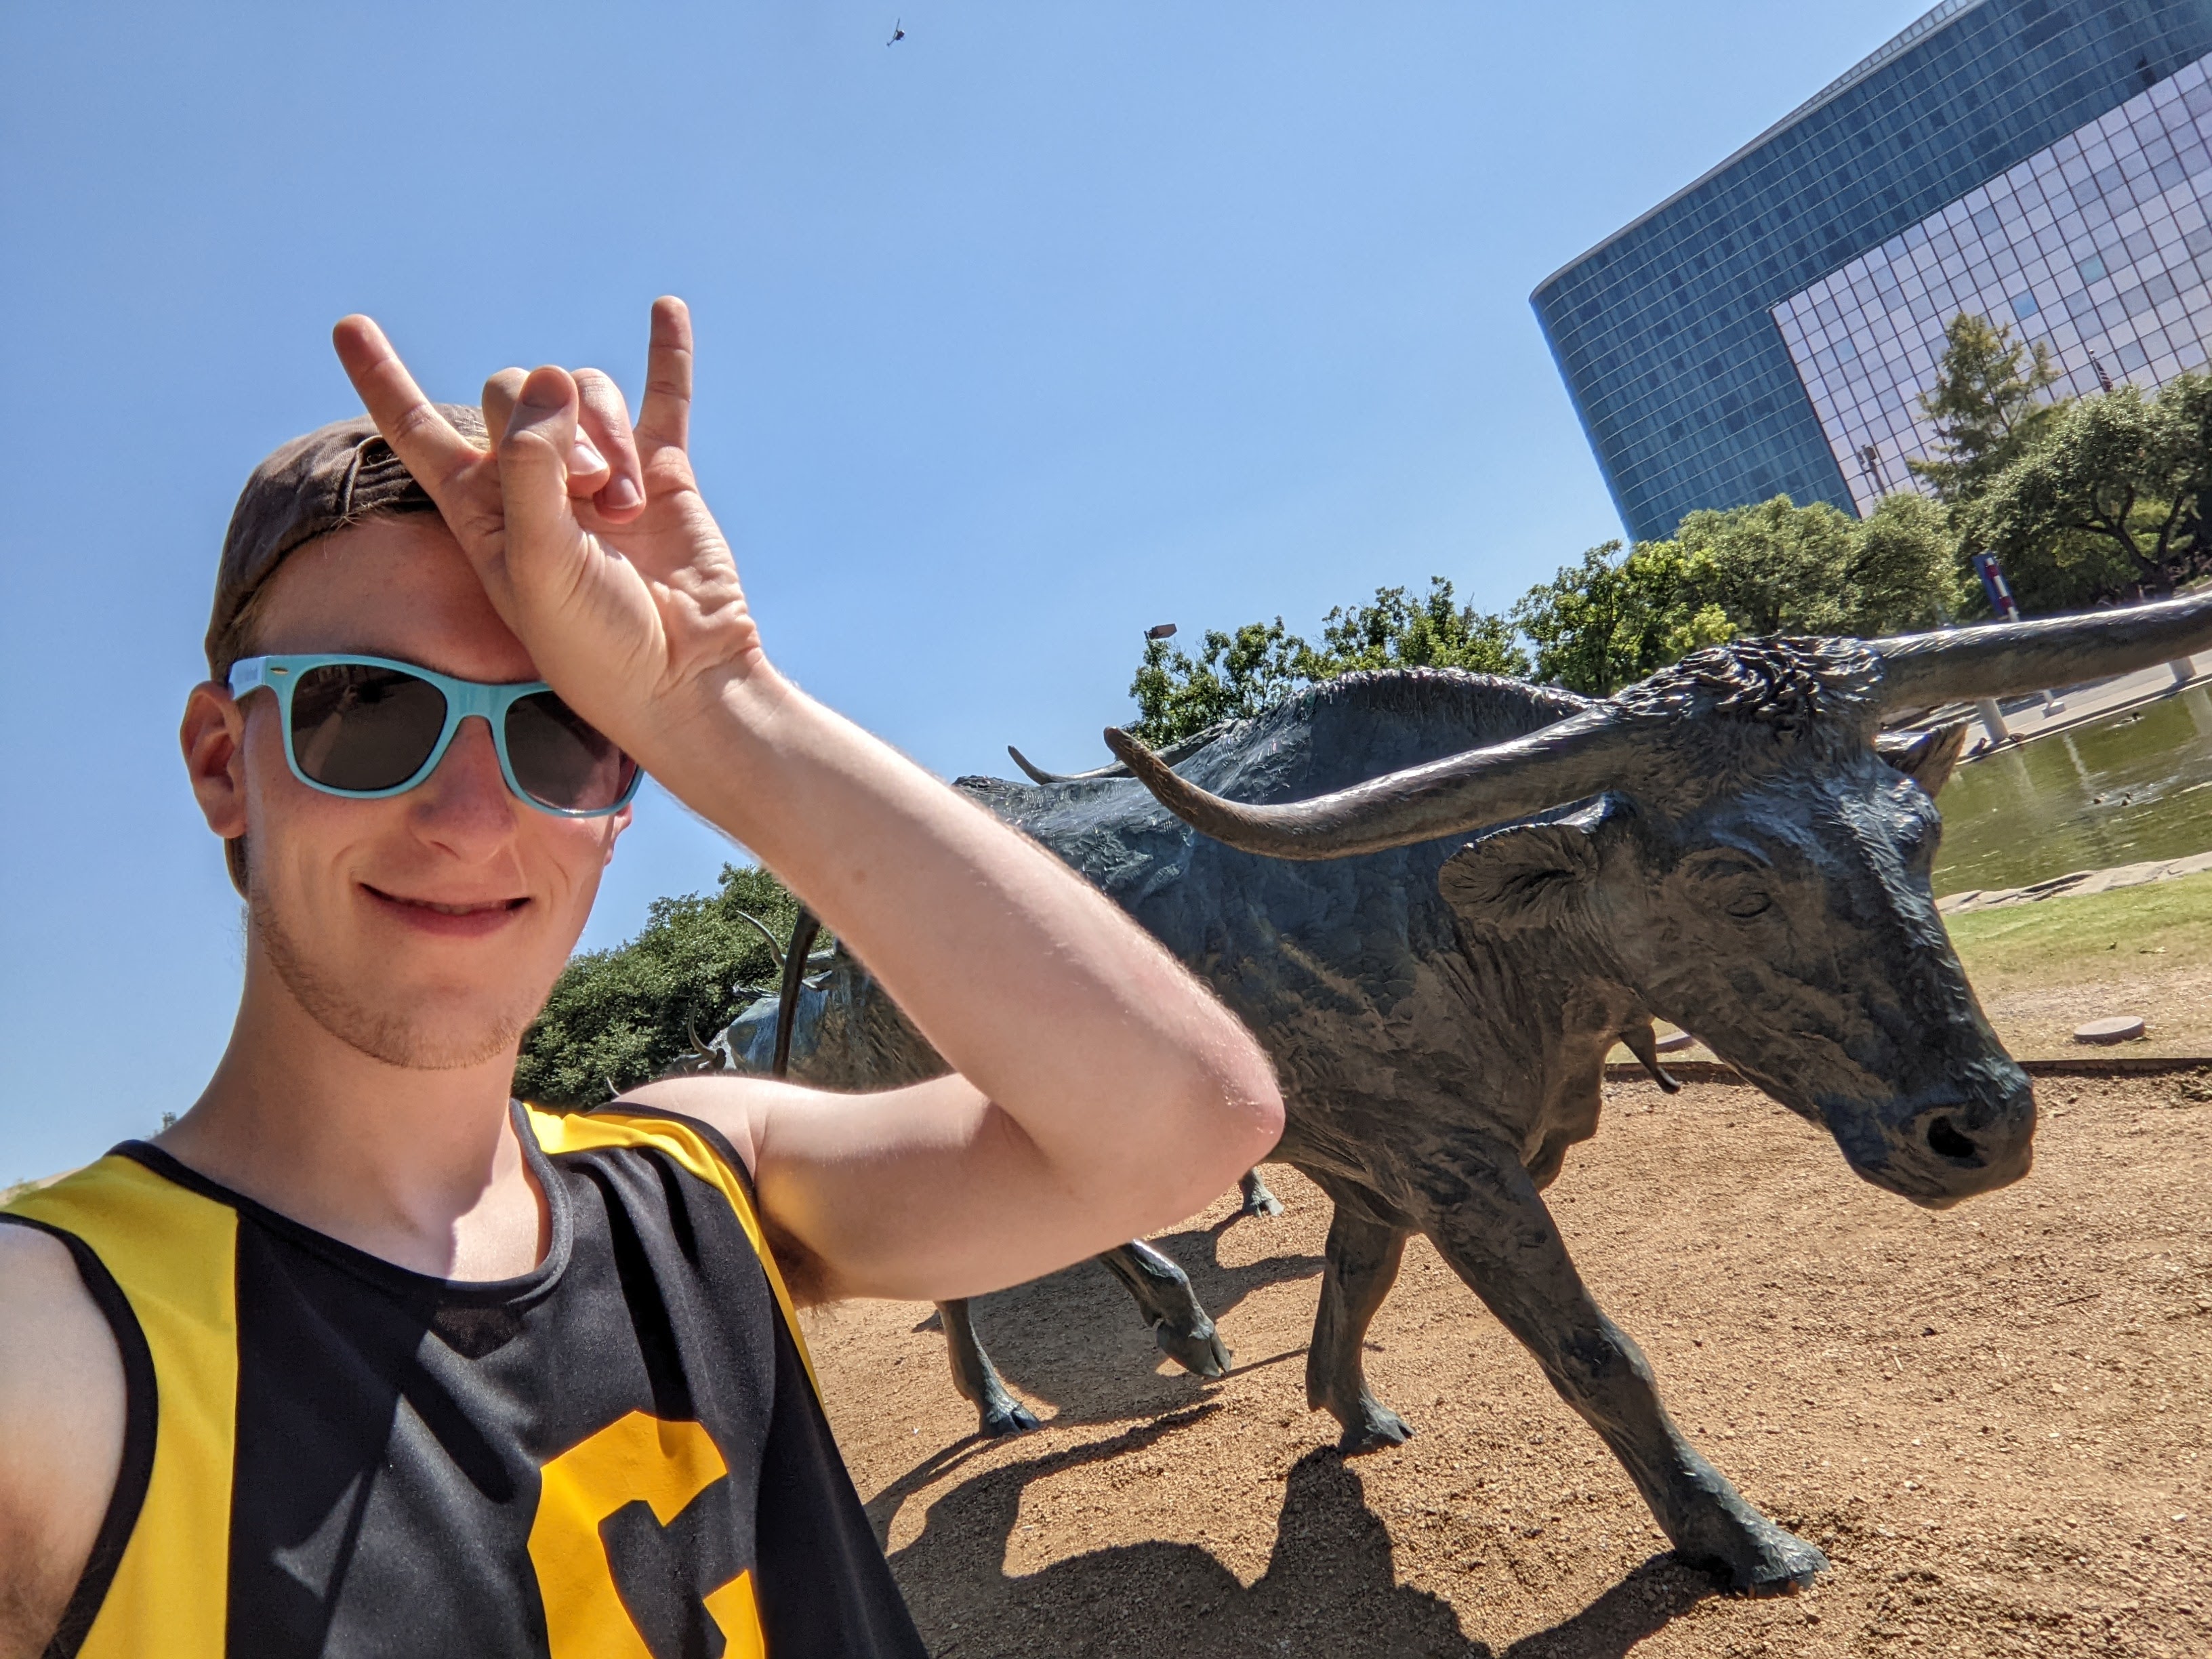 Kyle showing the "hook 'em horns" in front of a Brass Texas Longhorn statue